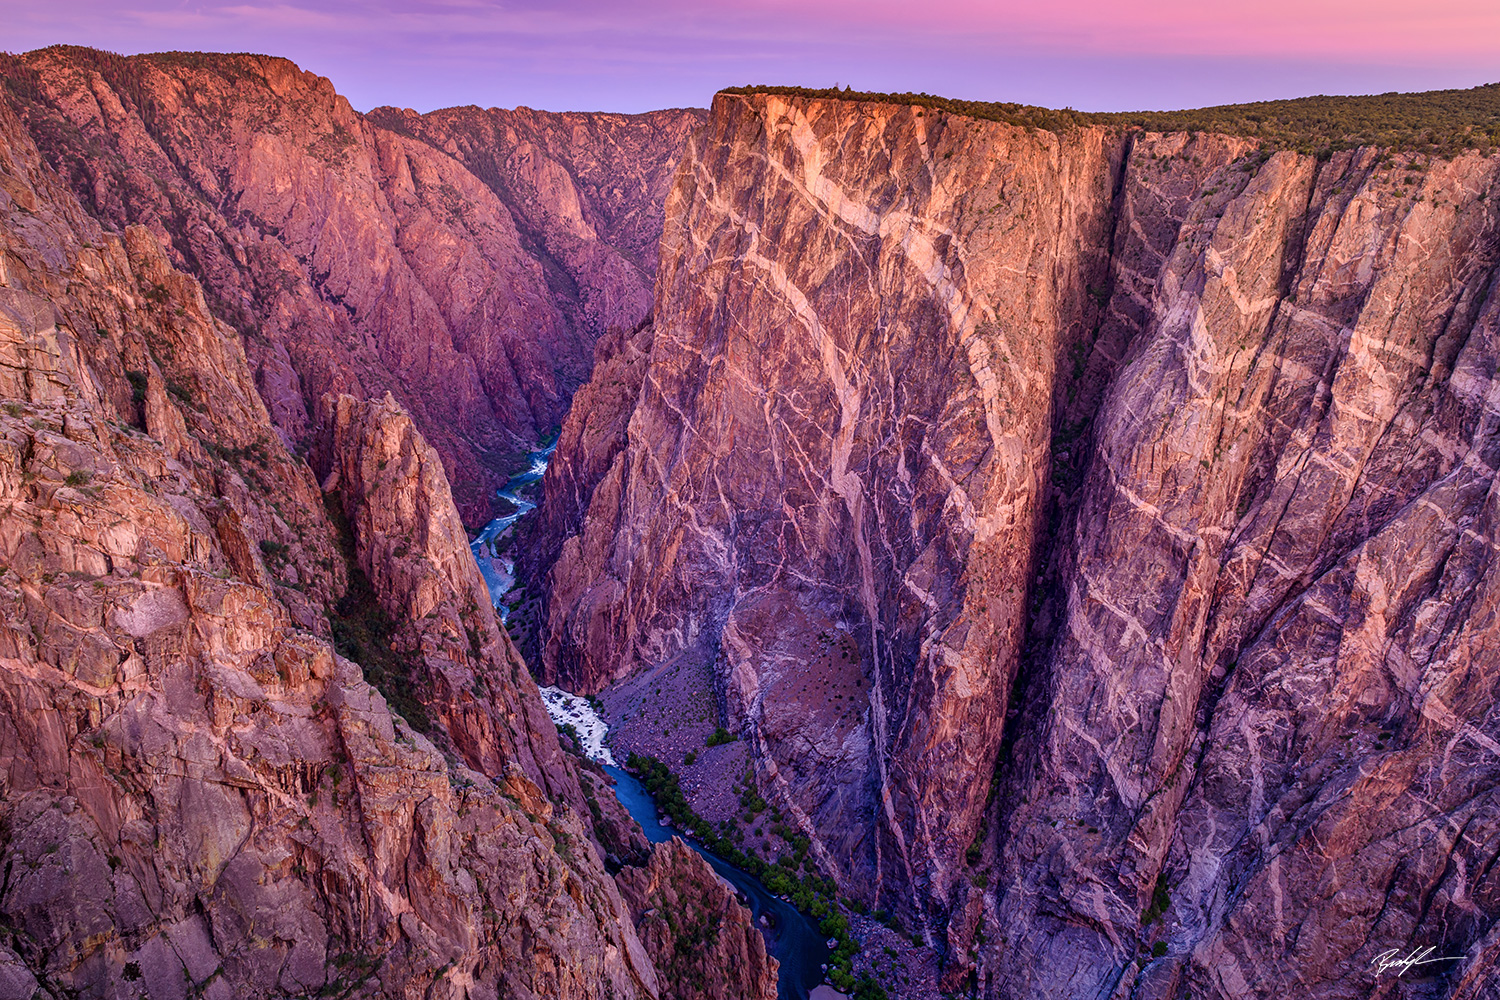 Alpenglow, Painted Wall, Black Canyon of the Gunnison National Park, Colorado